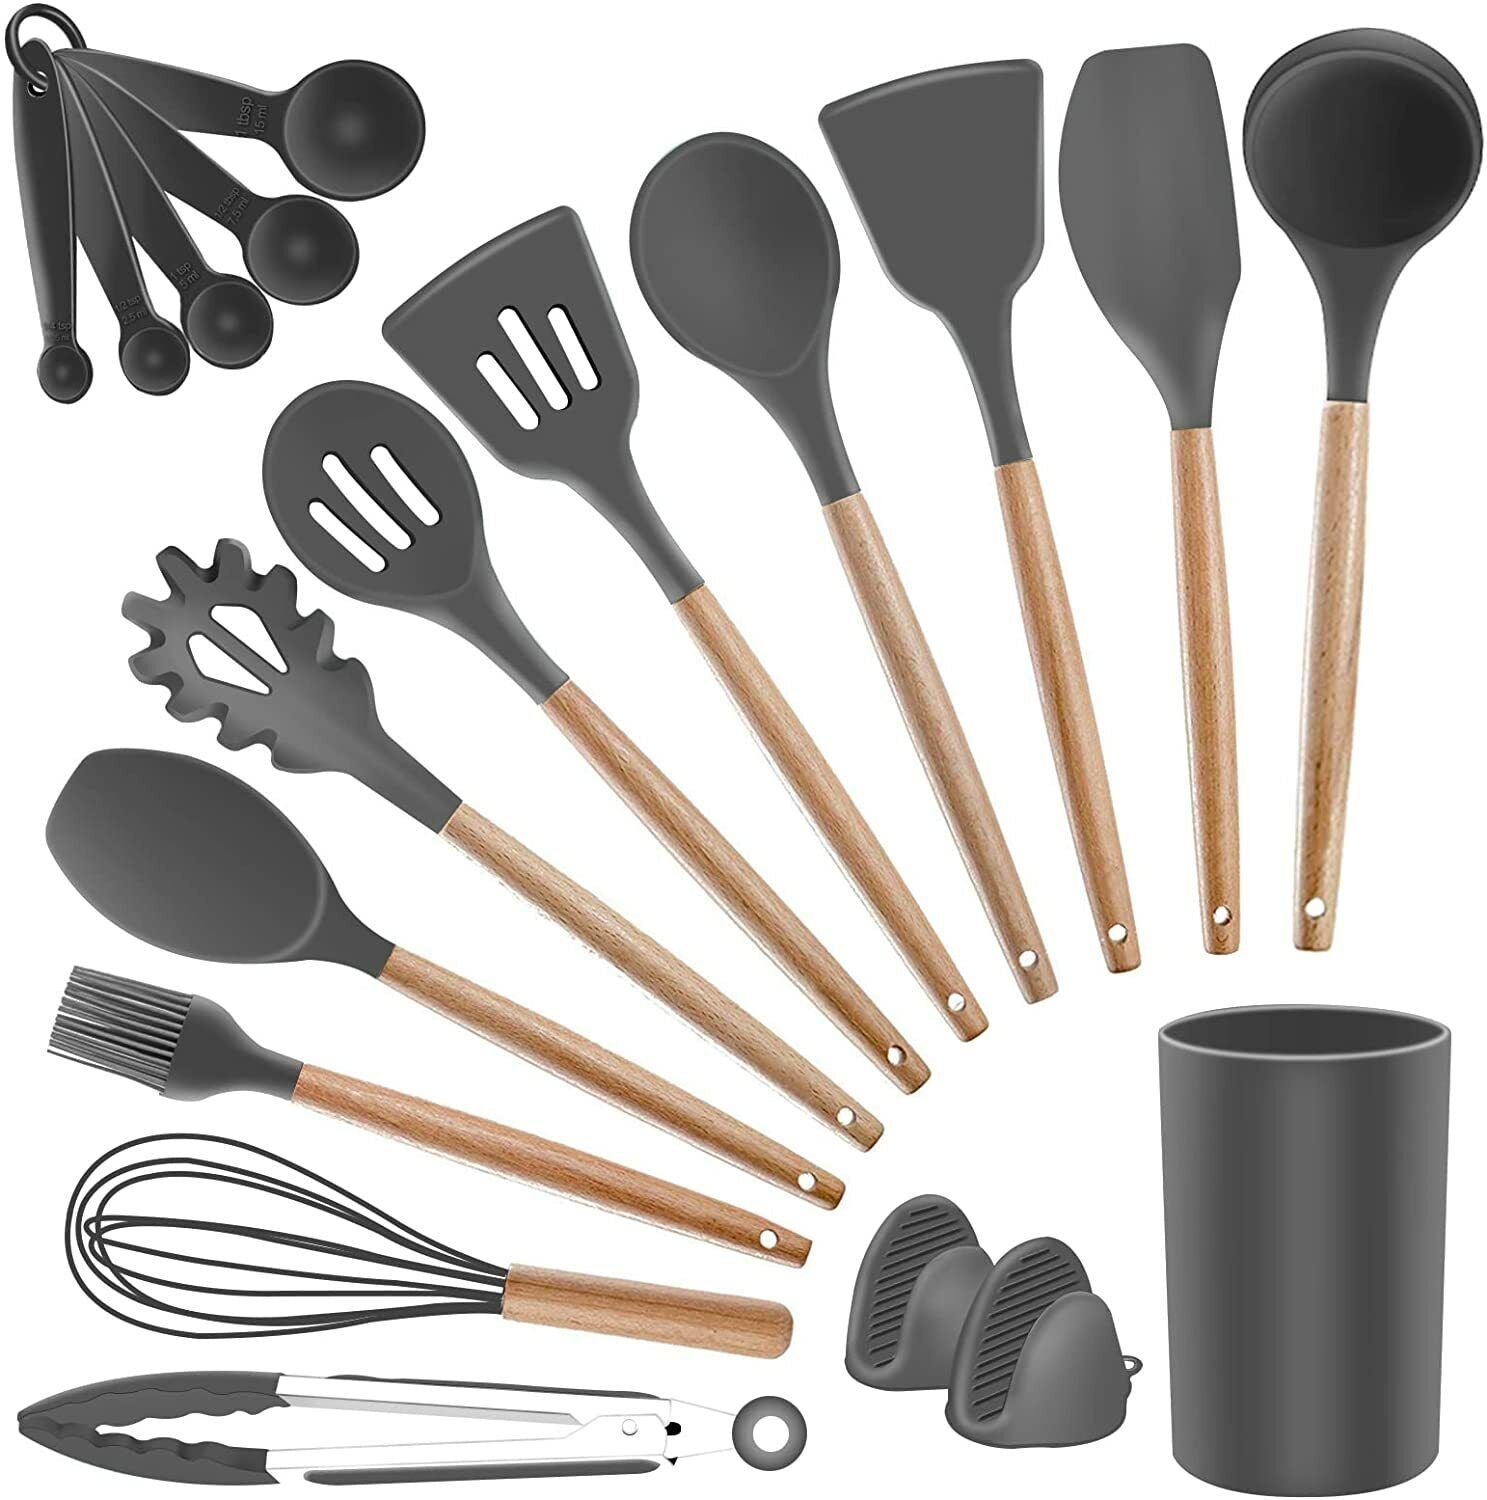 19 Pcs Silicone Kitchen Utensil Set with Holder